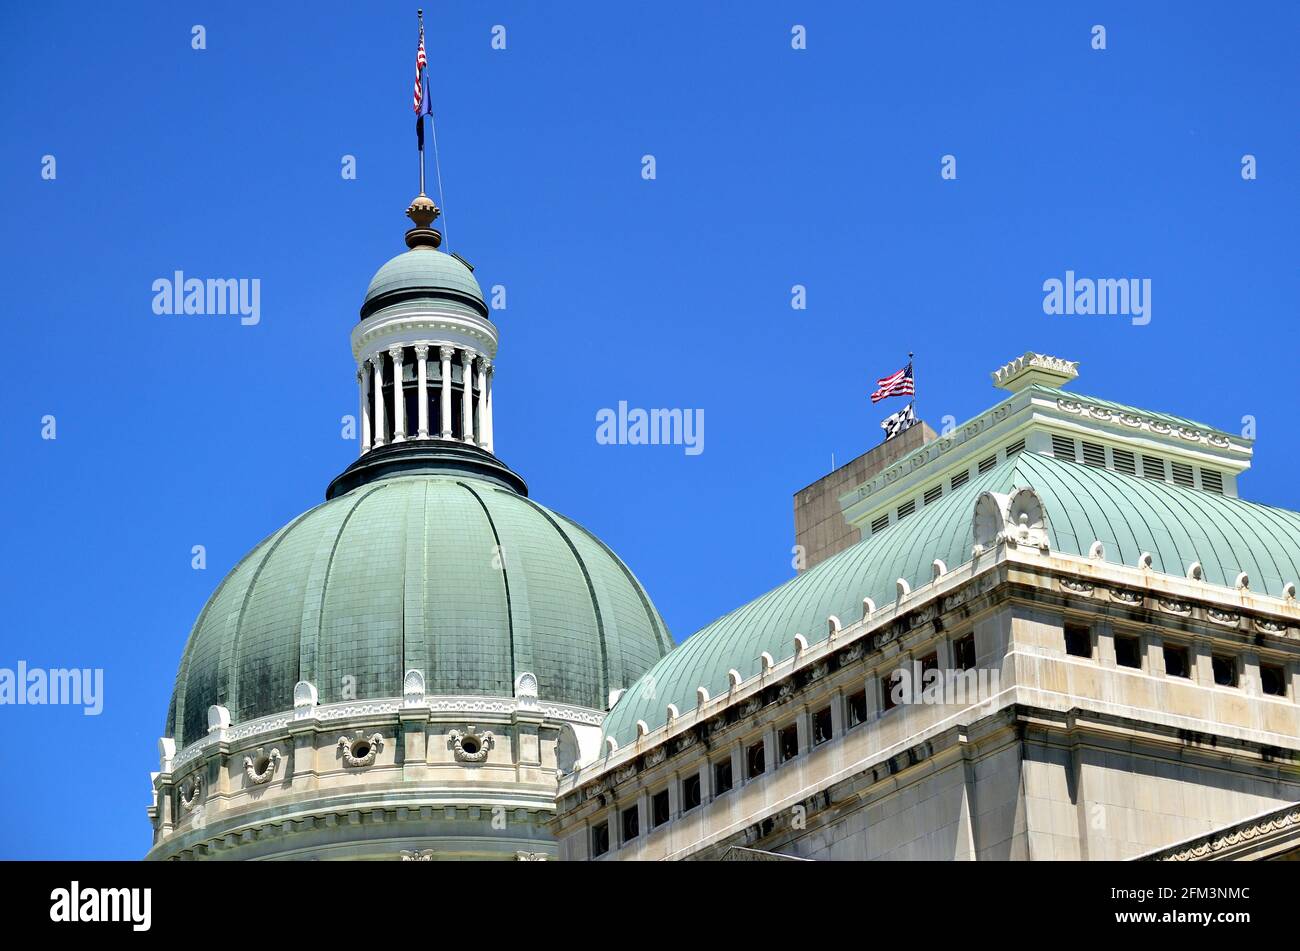 Indianapolis, Indiana, USA. Die Kuppel und die Dachlinie am Indiana State Capitol Building. Stockfoto